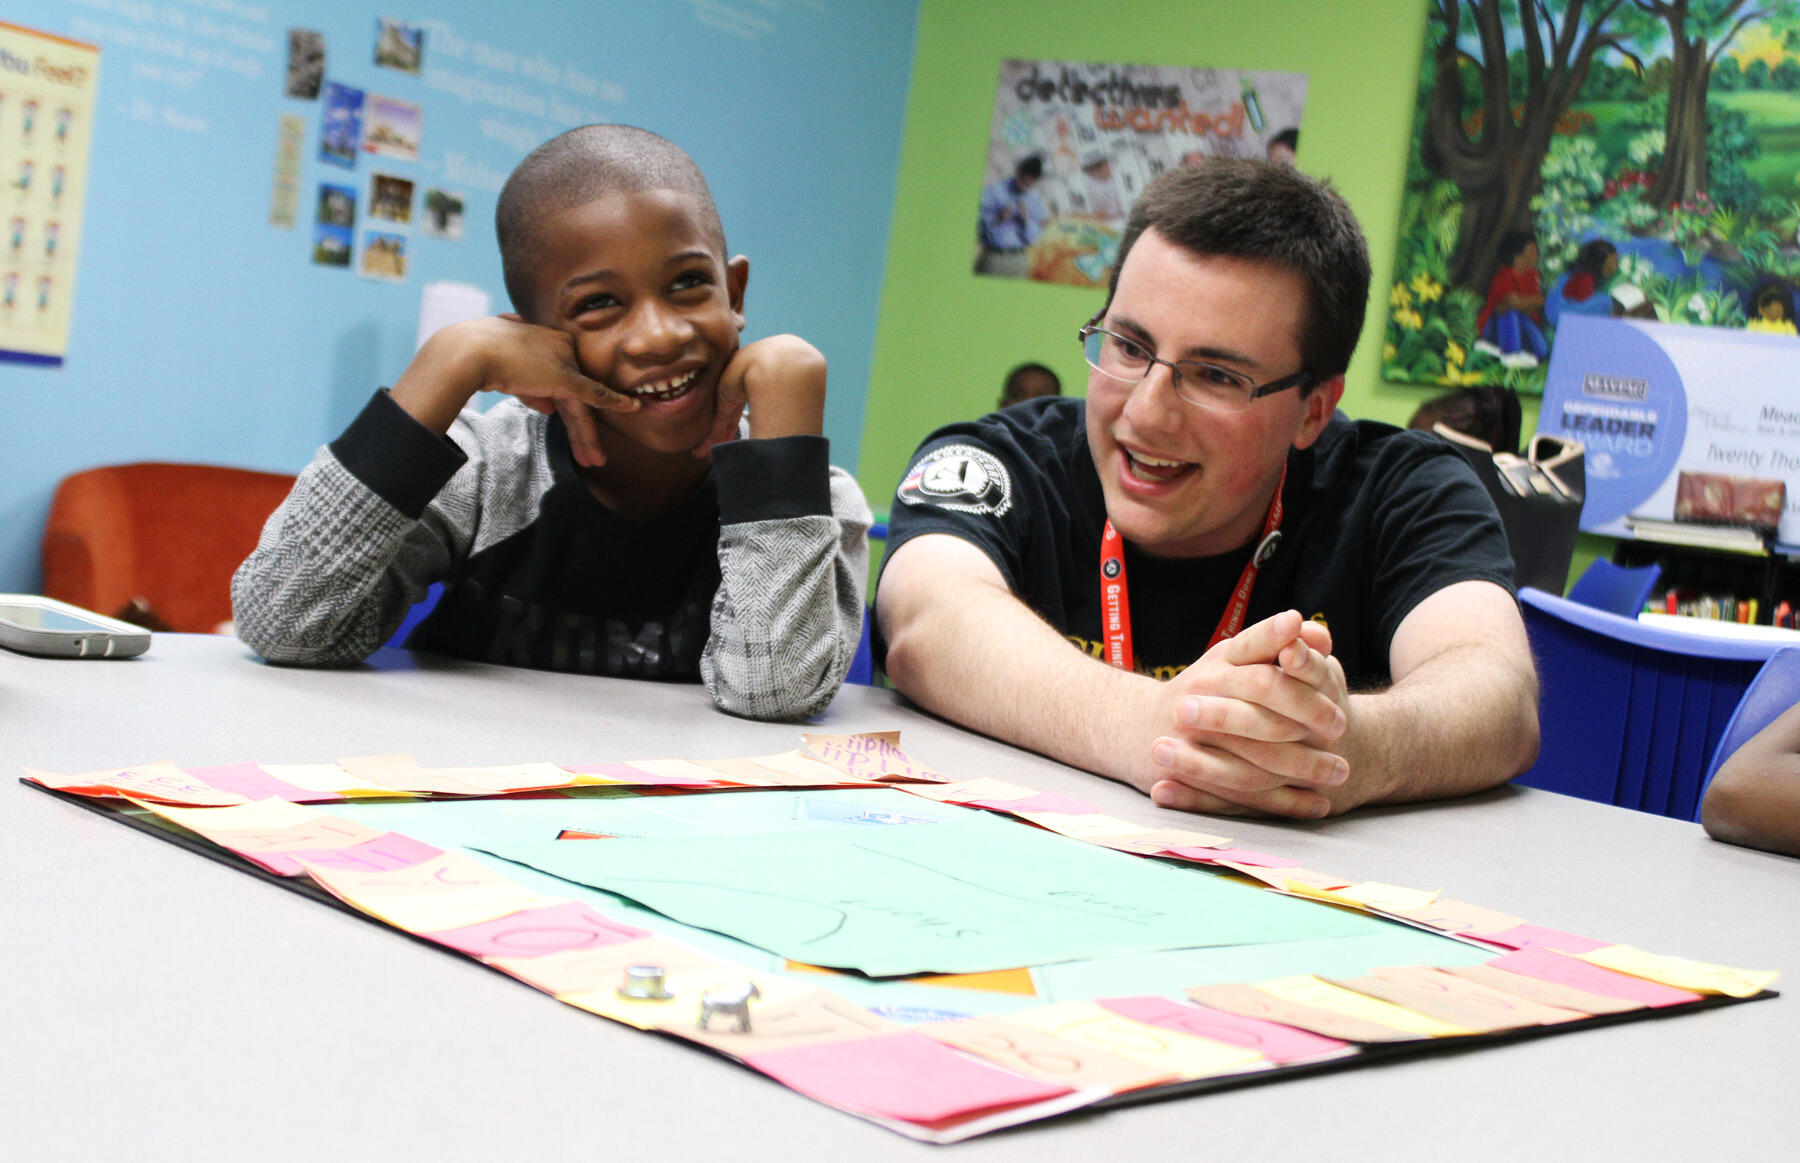 VCU AmeriCorps member Spencer Nichols and Christian Bailey try to think up words while playing a game with other Southside Boys and Girls Club members.<br>Photo by Pat Kane, VCU Public Affairs